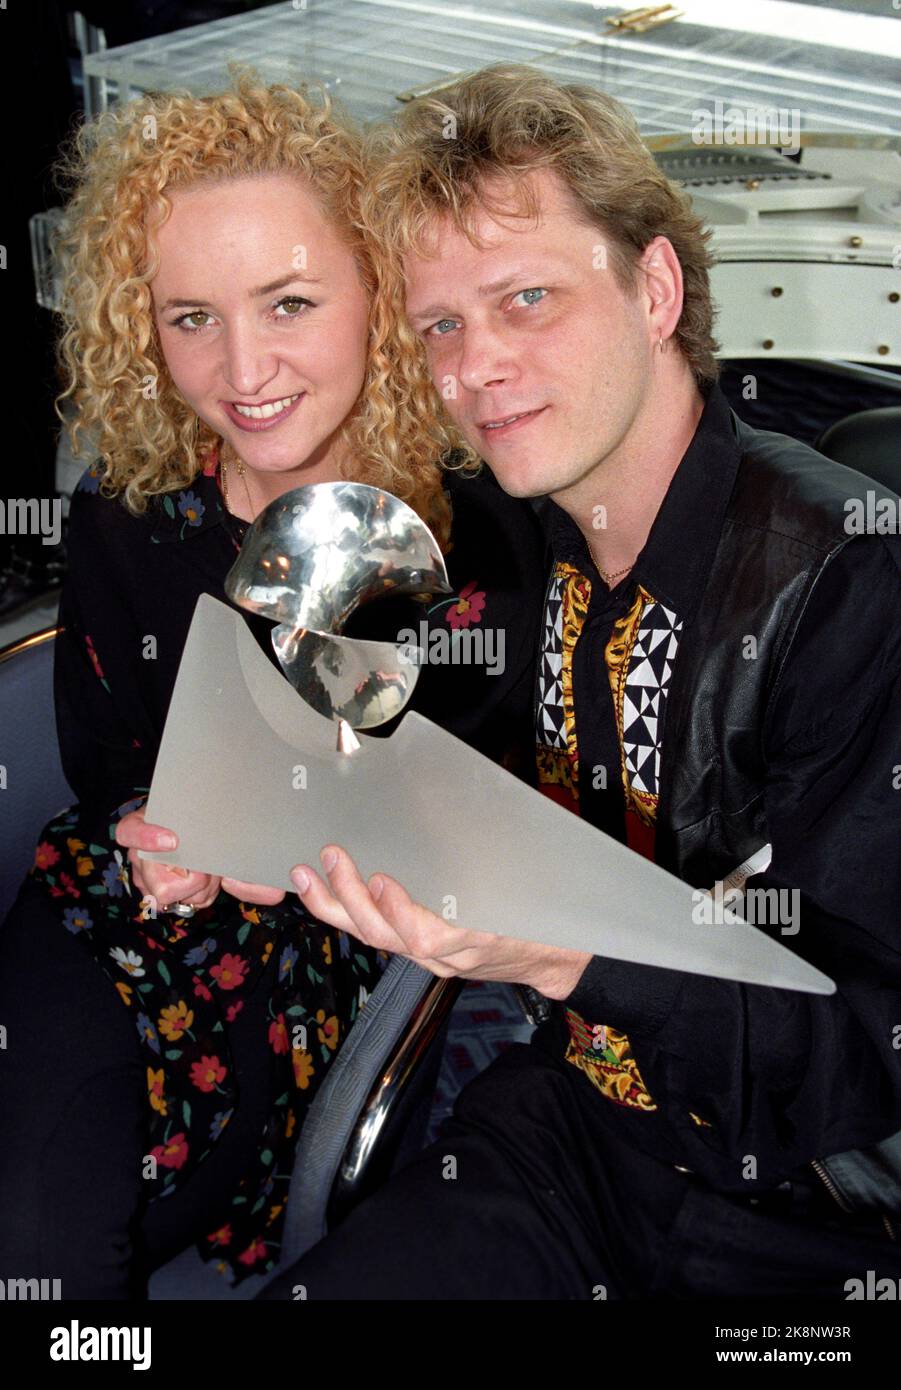 199505 Musician Rolf Løvland with artist Fionnuala Sherry. The duo Secret Garden with Rolf Løvland and Fionnuala Sherry is one of our greatest international success artists. Photo: Erik Johansen / NTB Stock Photo